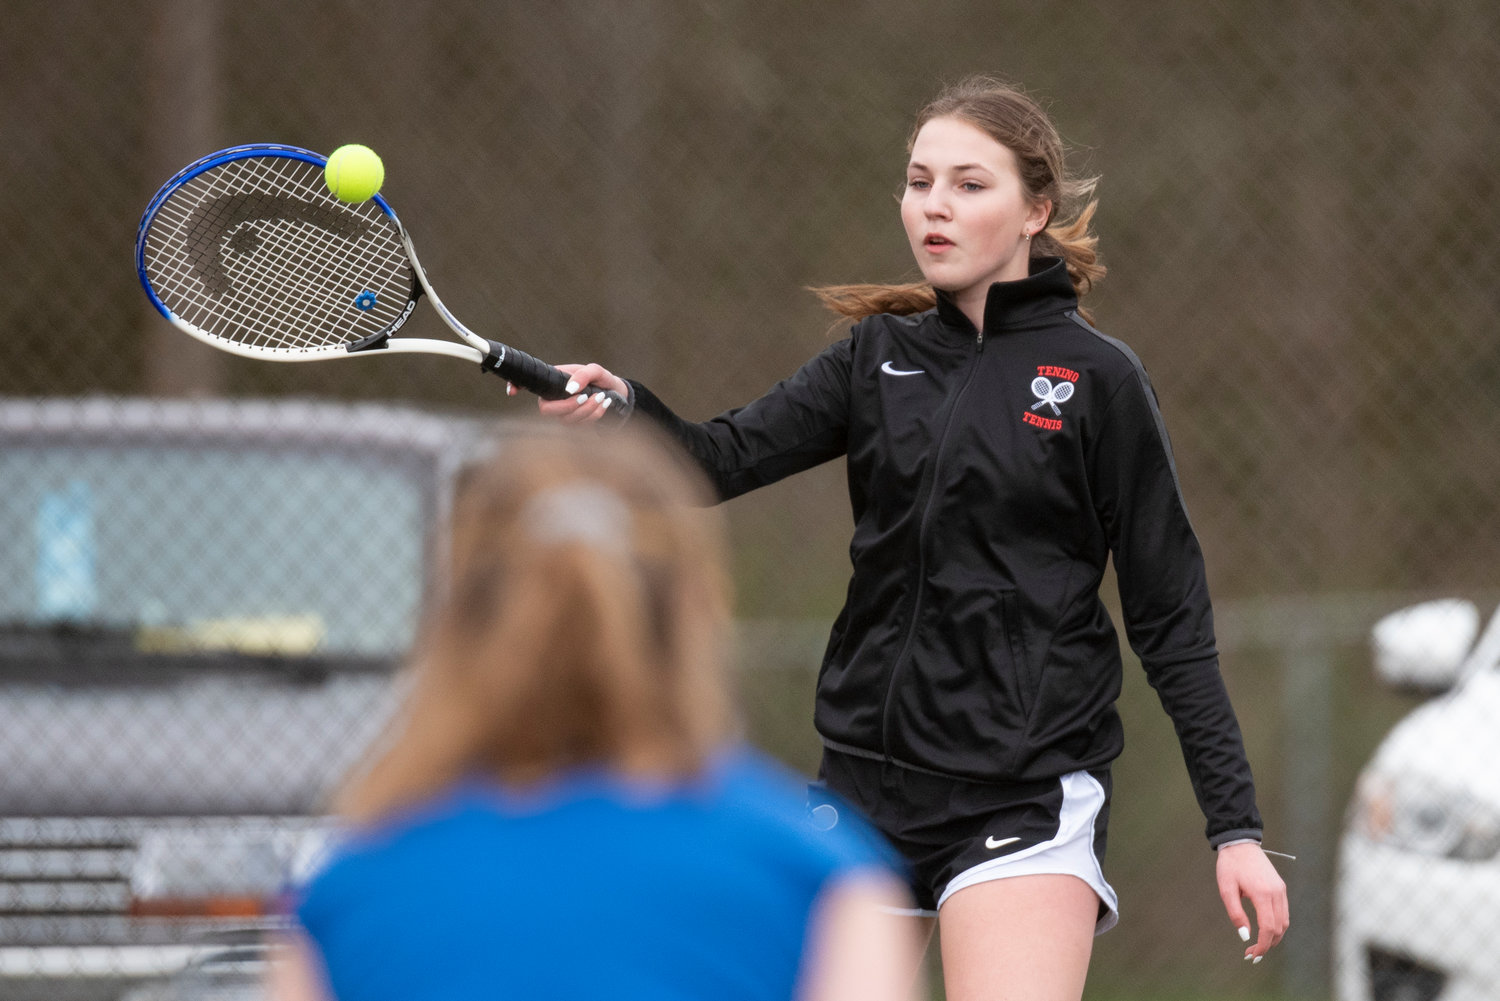 Tenino's Rilee Jones returns a serve from an Eatonville player in No. 1 doubles during a home meet on March 29.